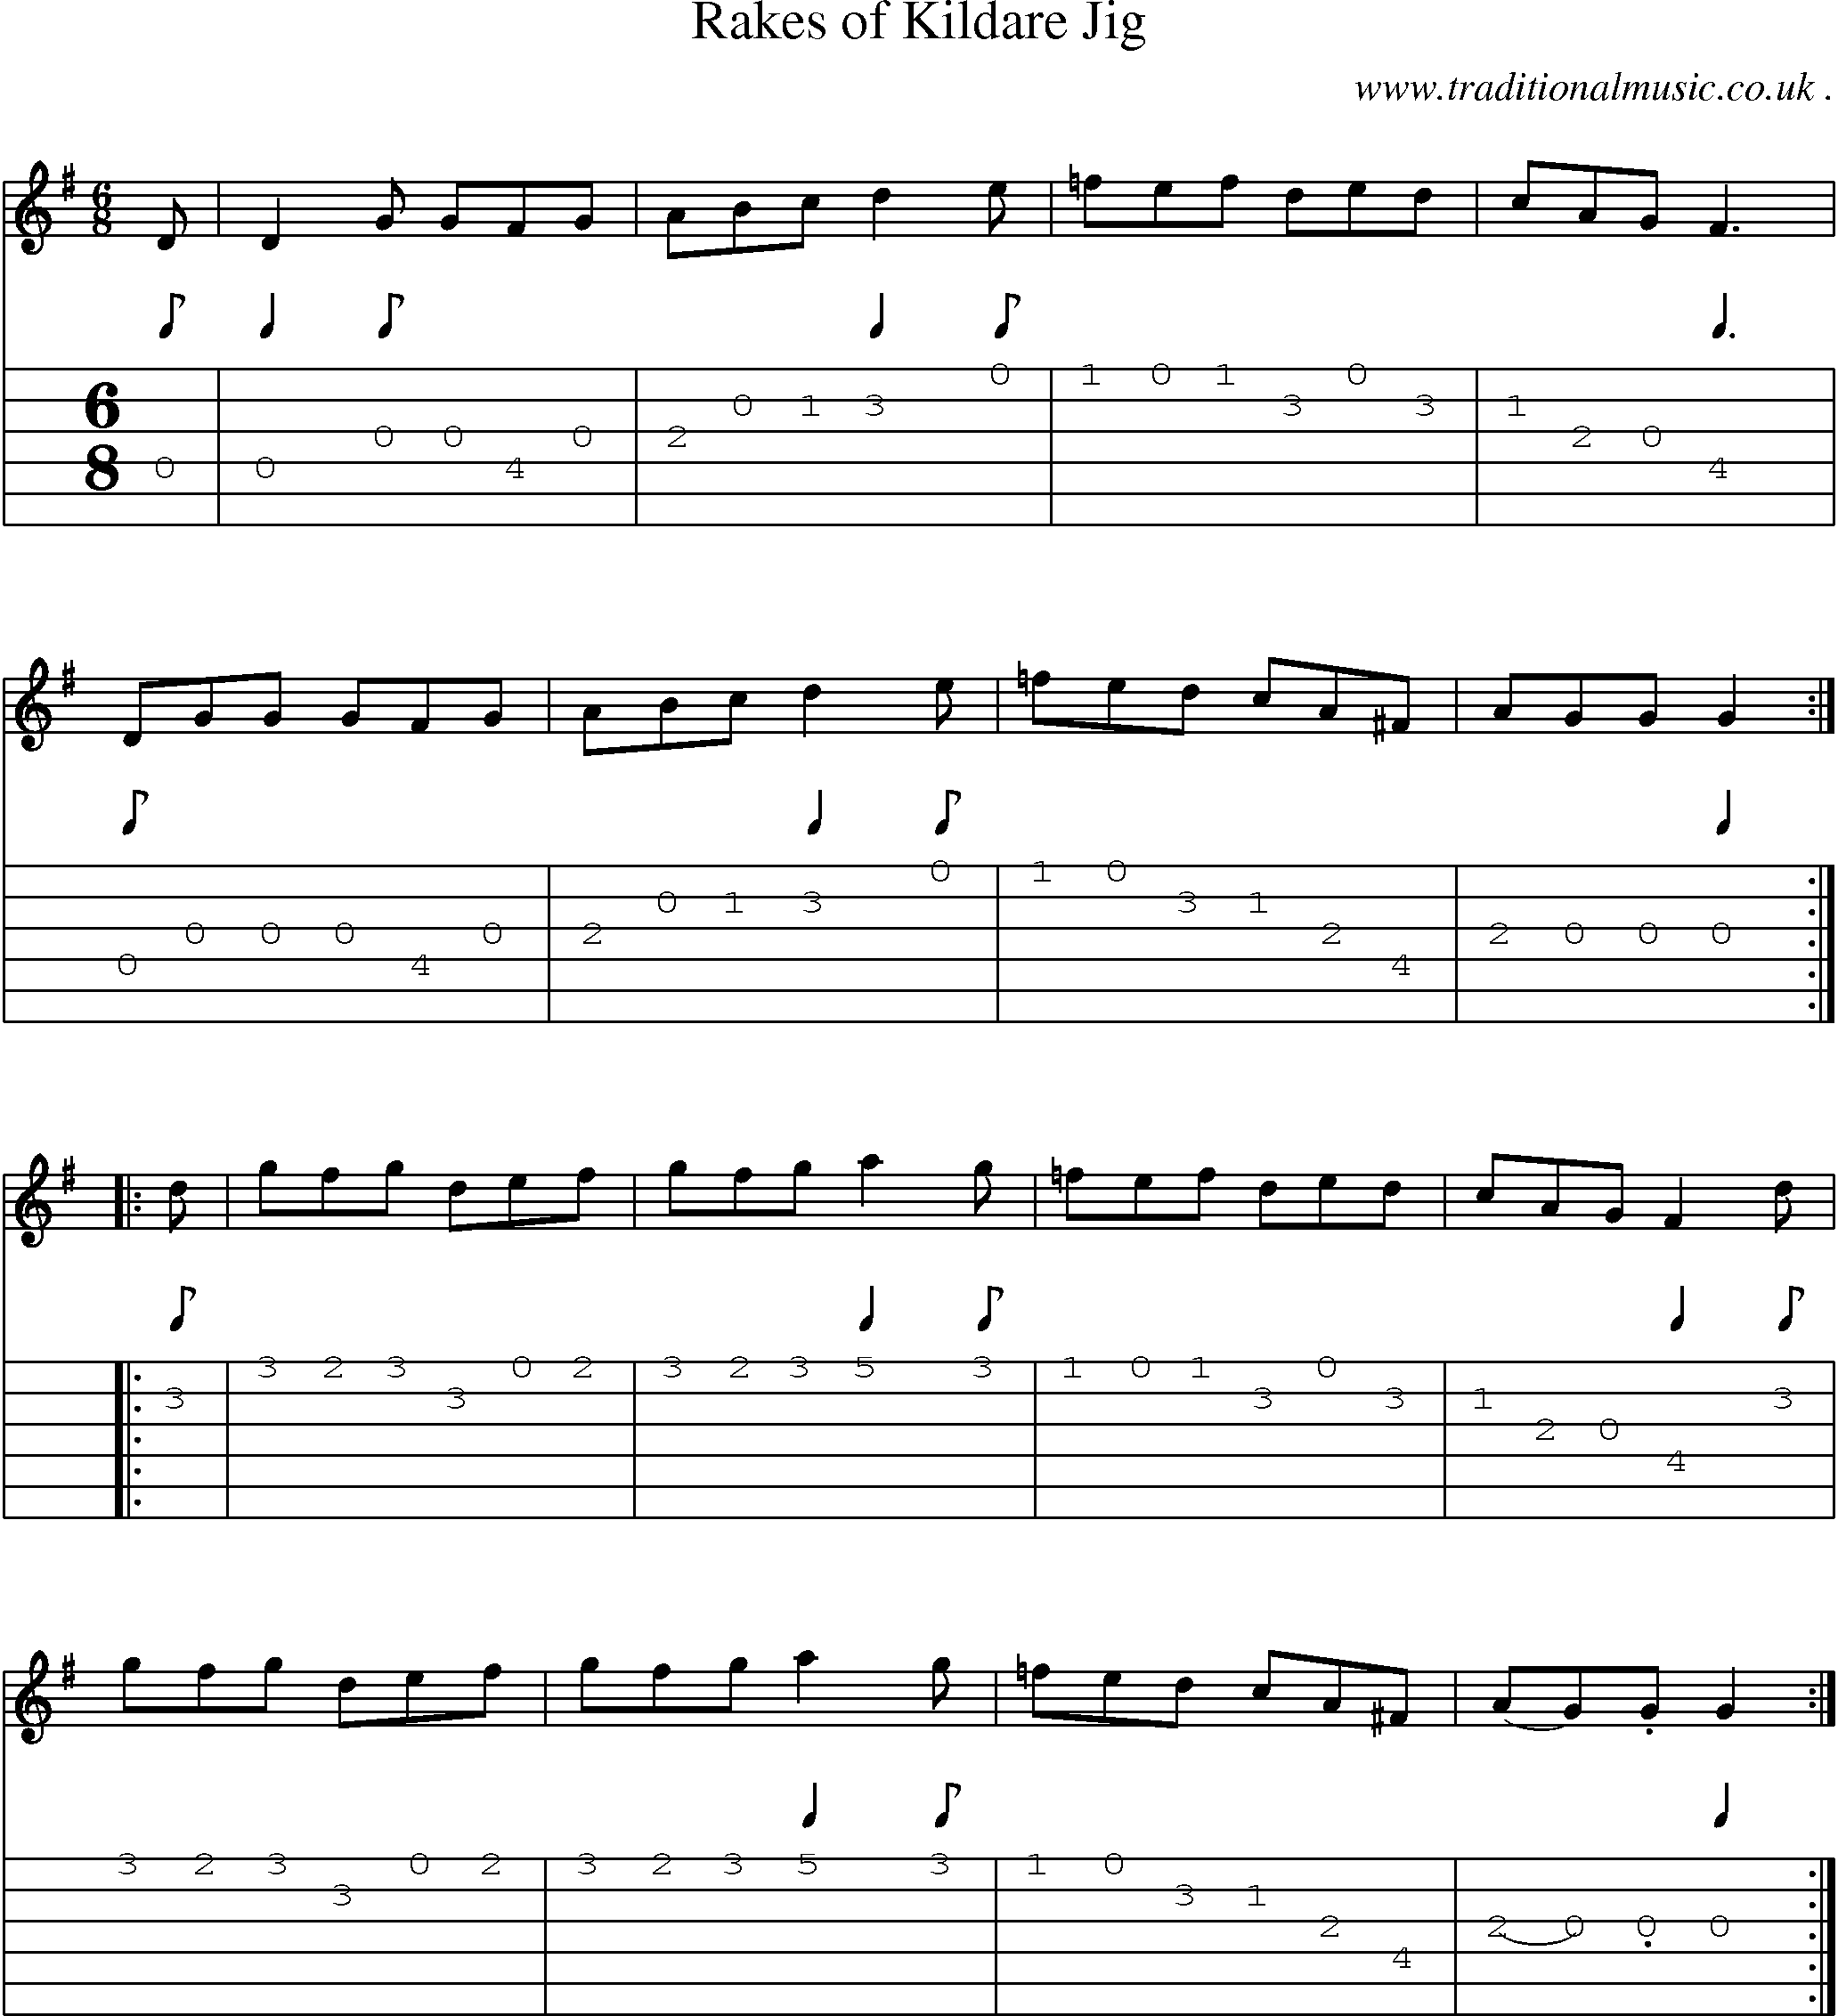 Sheet-Music and Guitar Tabs for Rakes Of Kildare Jig